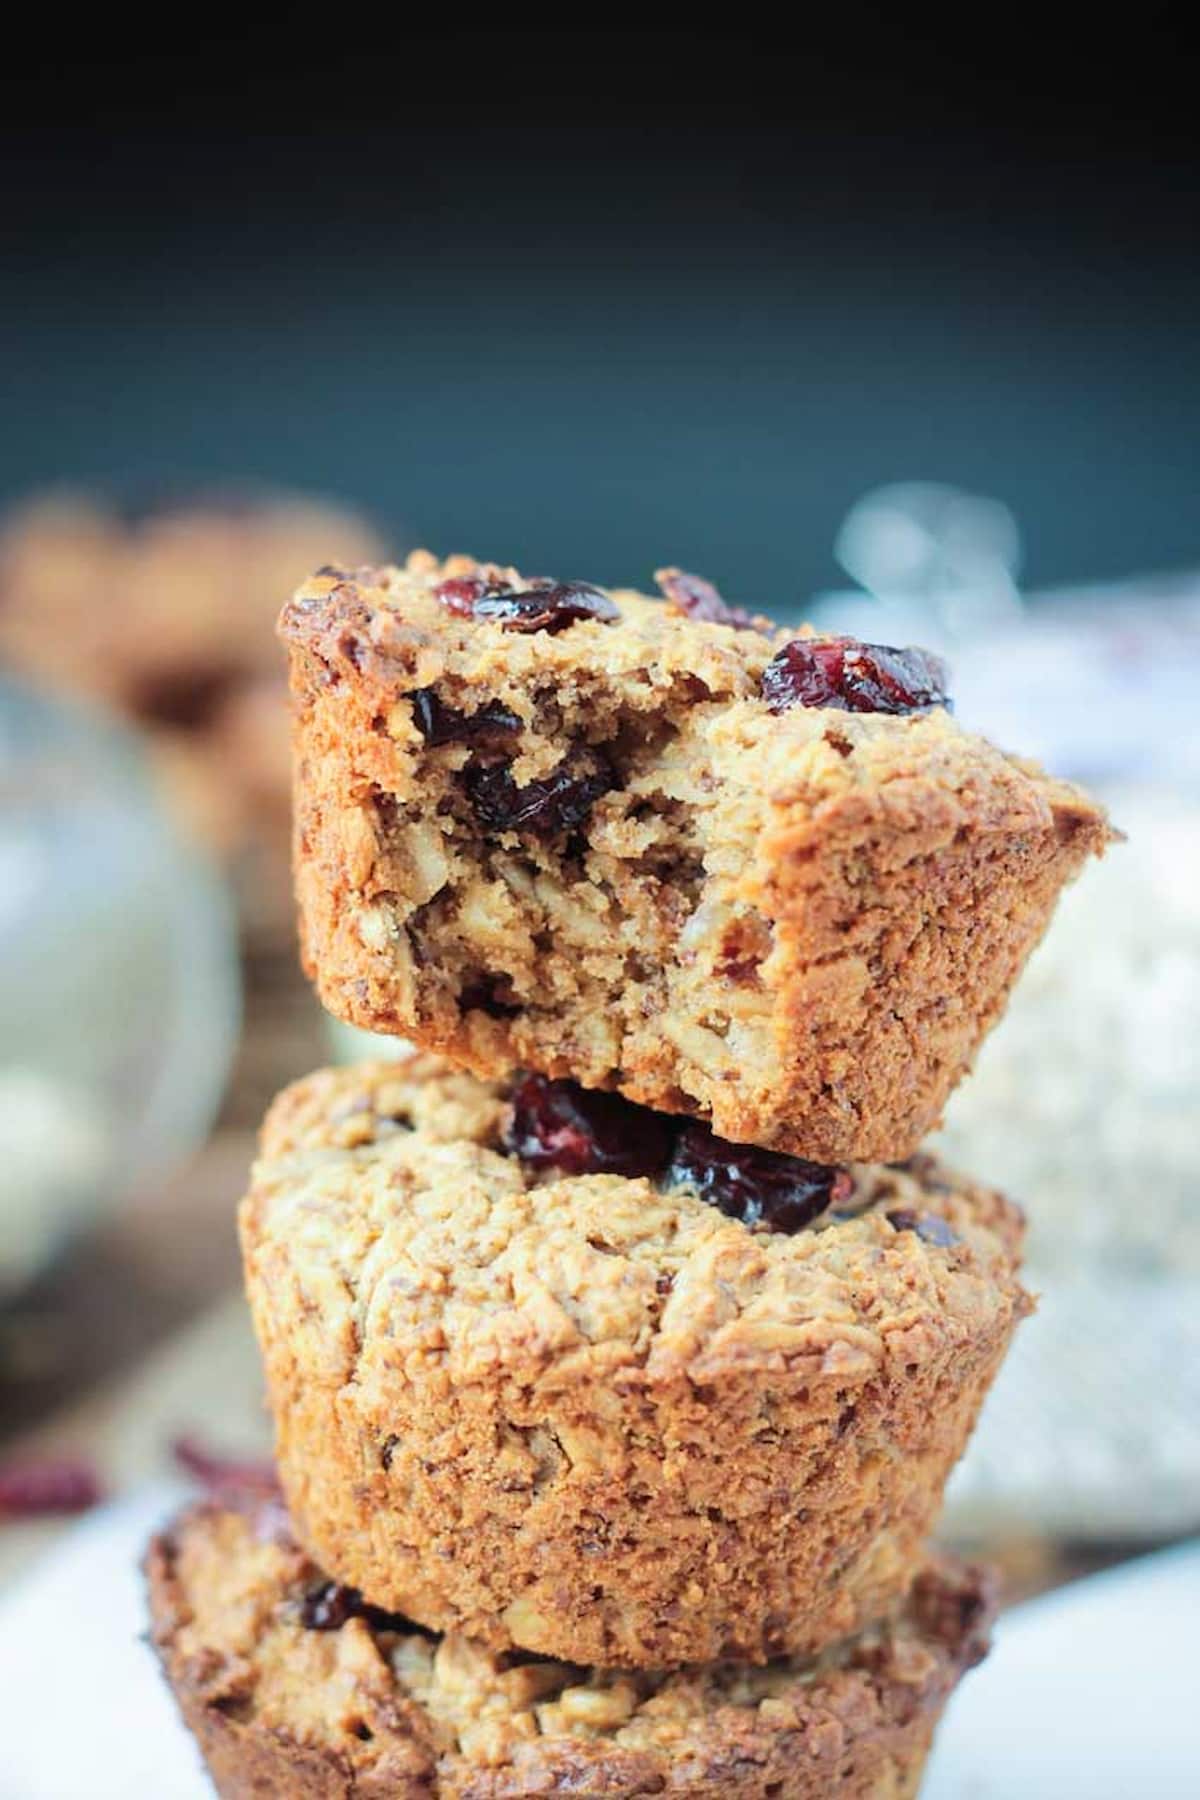 Three baked cranberry oatmeal muffins stacked with the top one missing a bite.